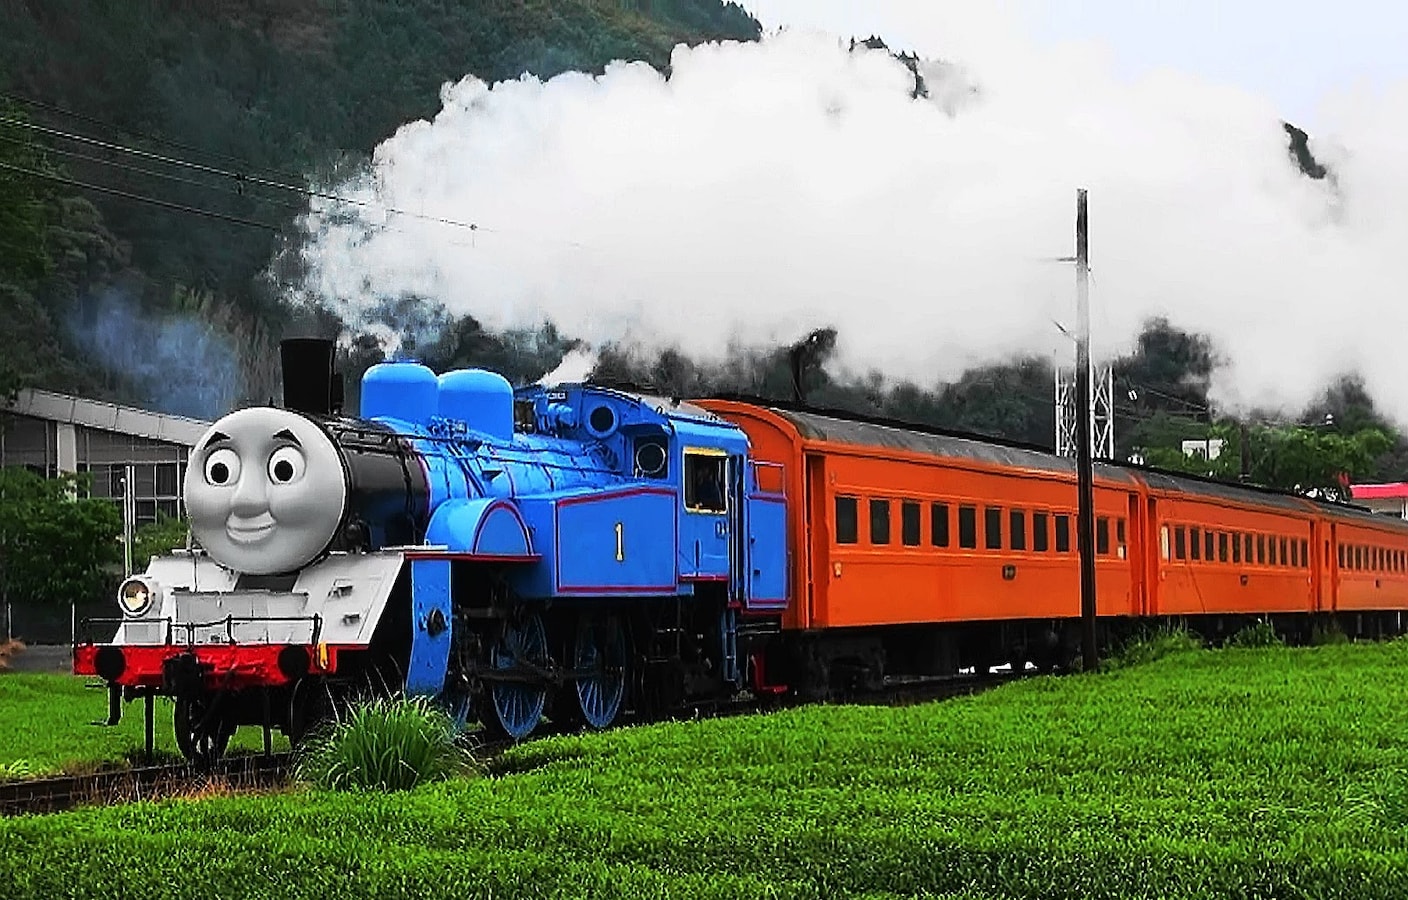 Thomas the Train Wallpapers - Top Free Thomas the Train Backgrounds ...